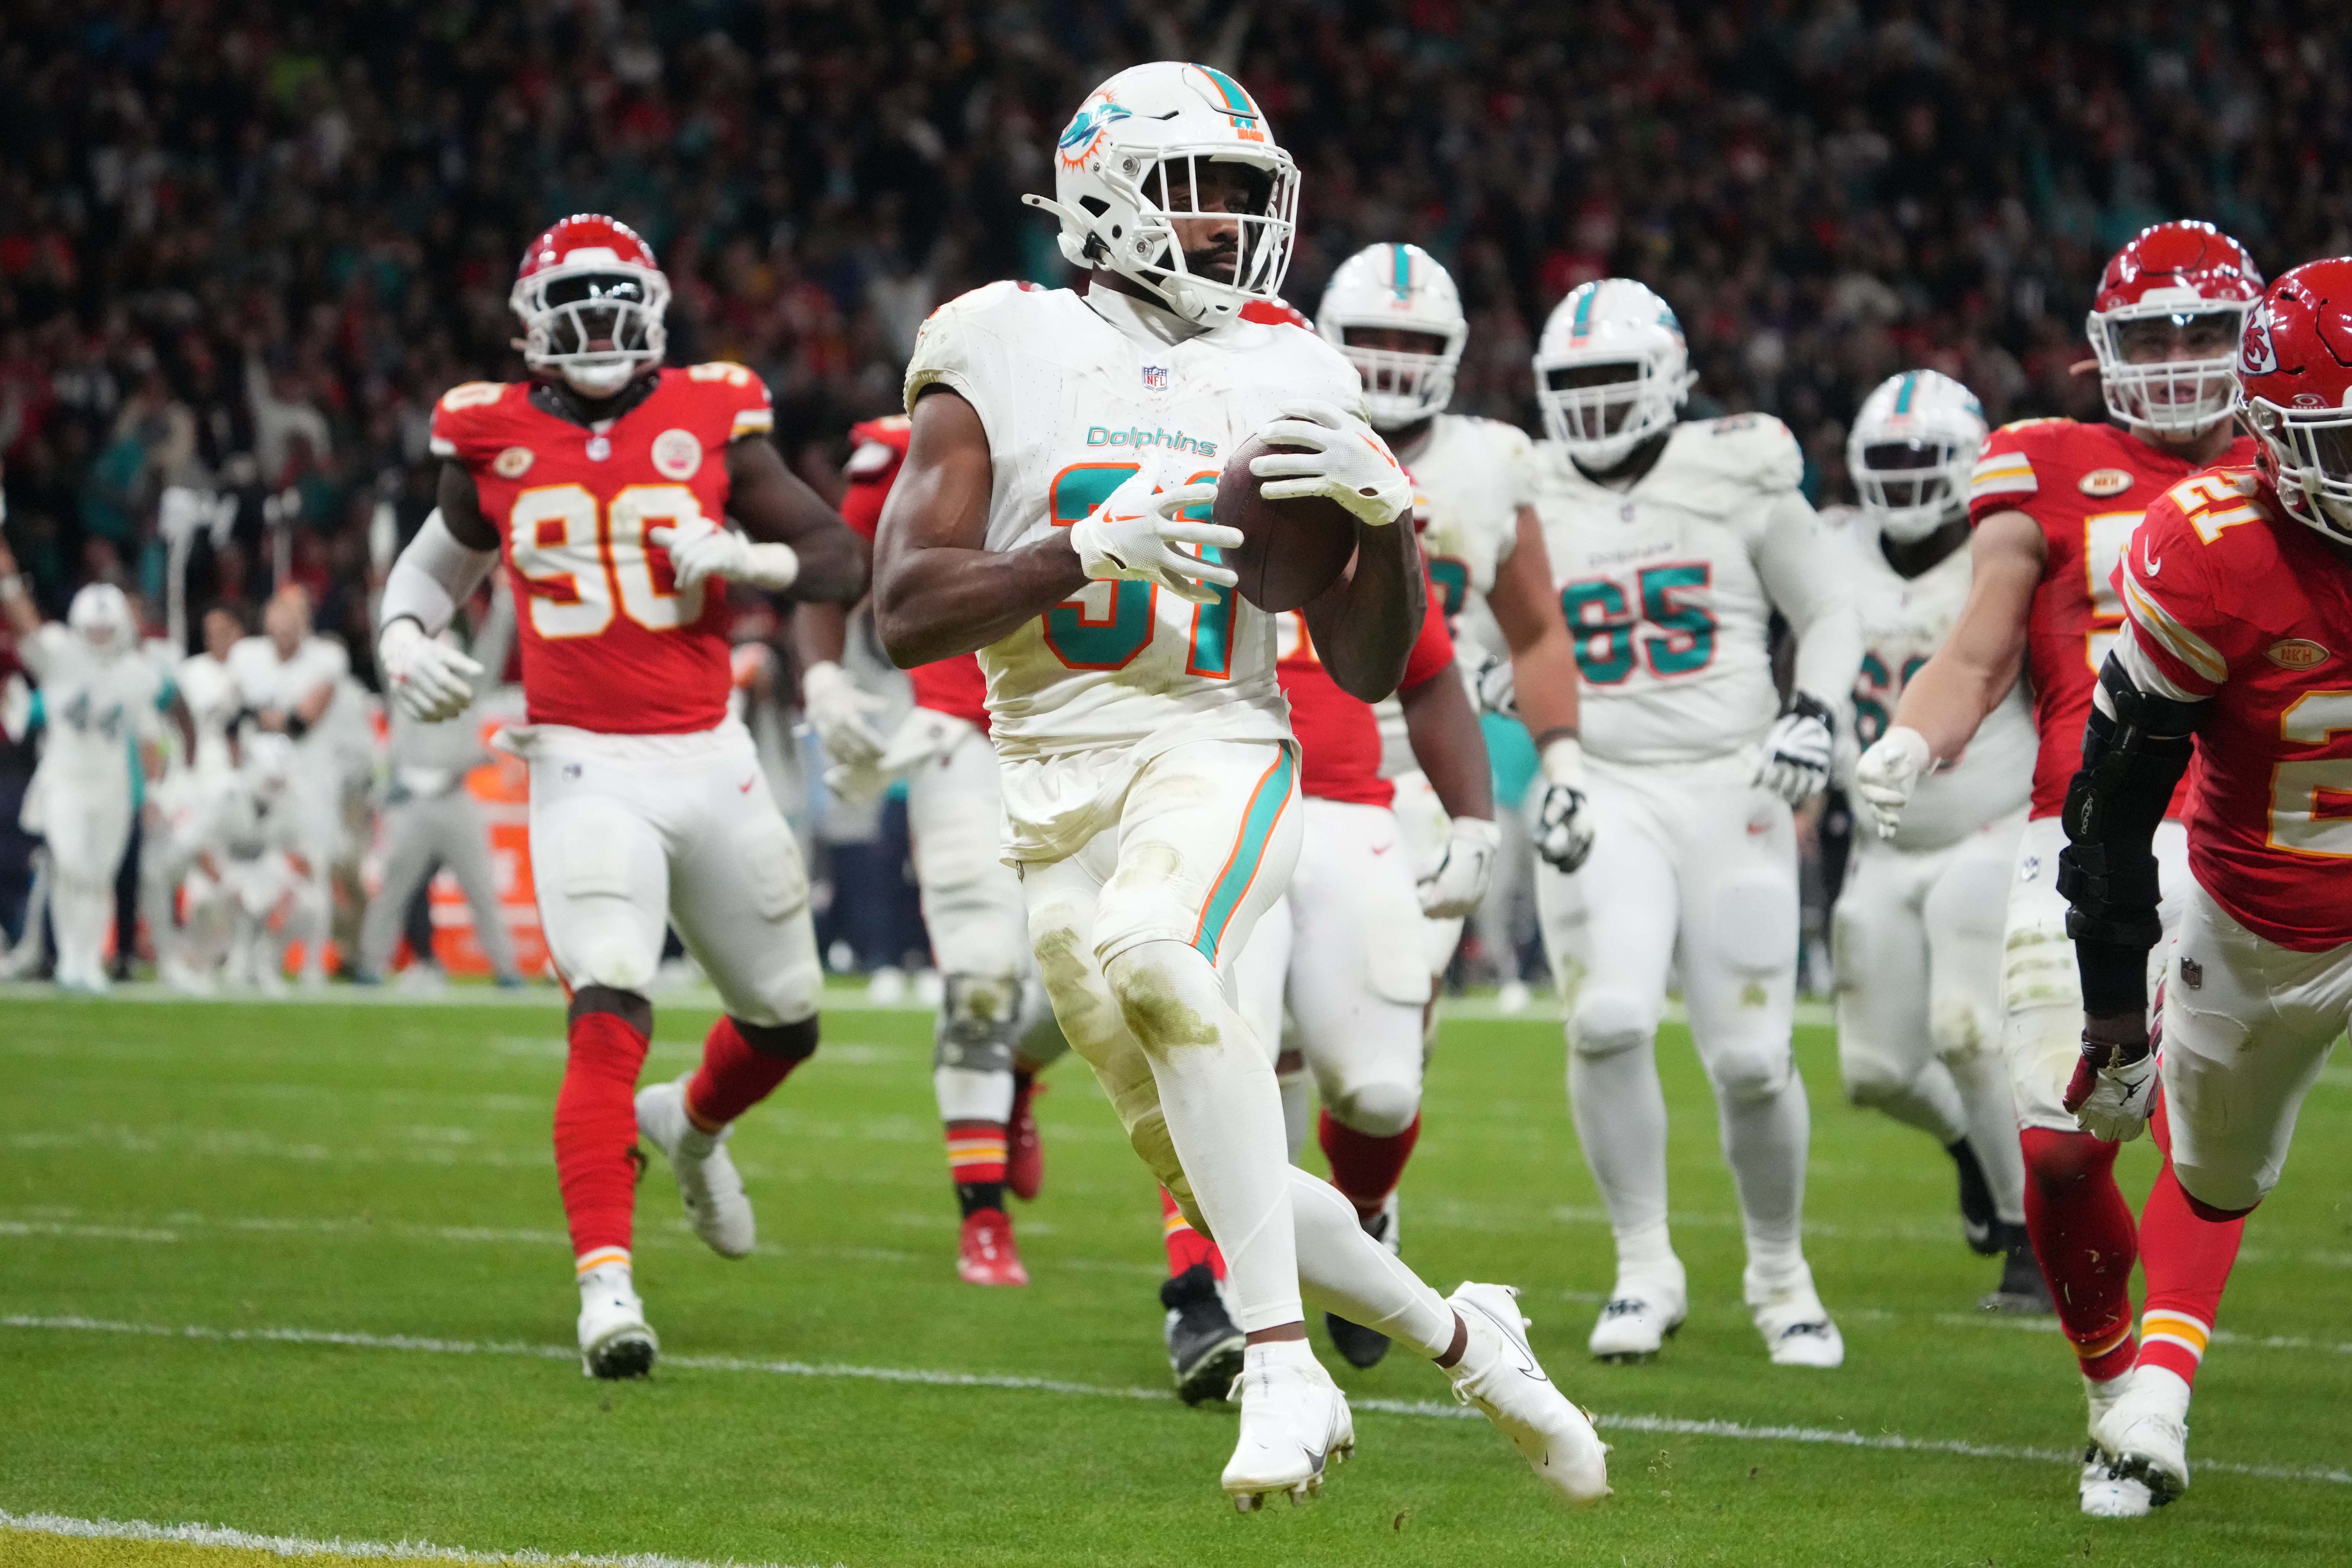 Miami Dolphins running back Raheem Mostert carries the ball in his hands as he runs while a slew of Chiefs players run behind him